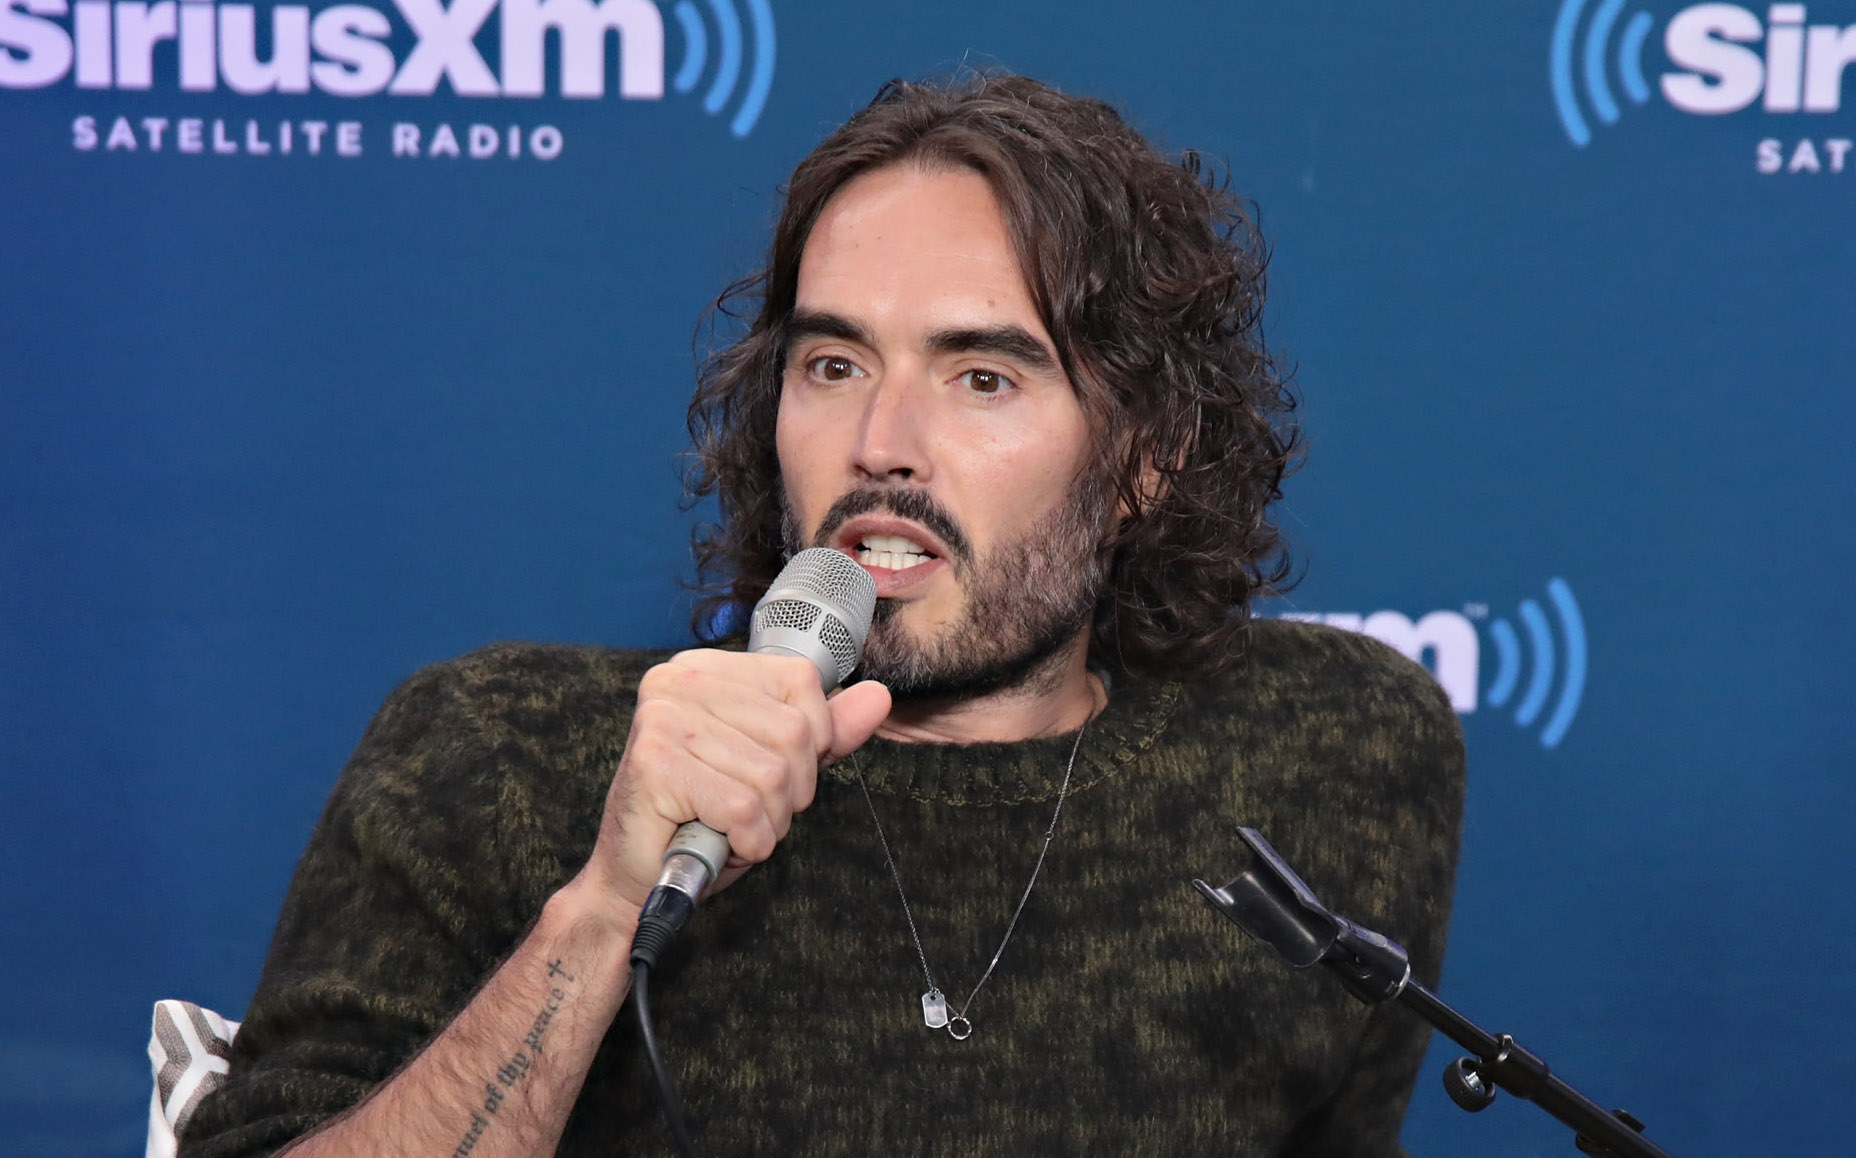 Russell Brand Opens Up About Recent Conversion to Christianity: “It’s Been Life-Changing!